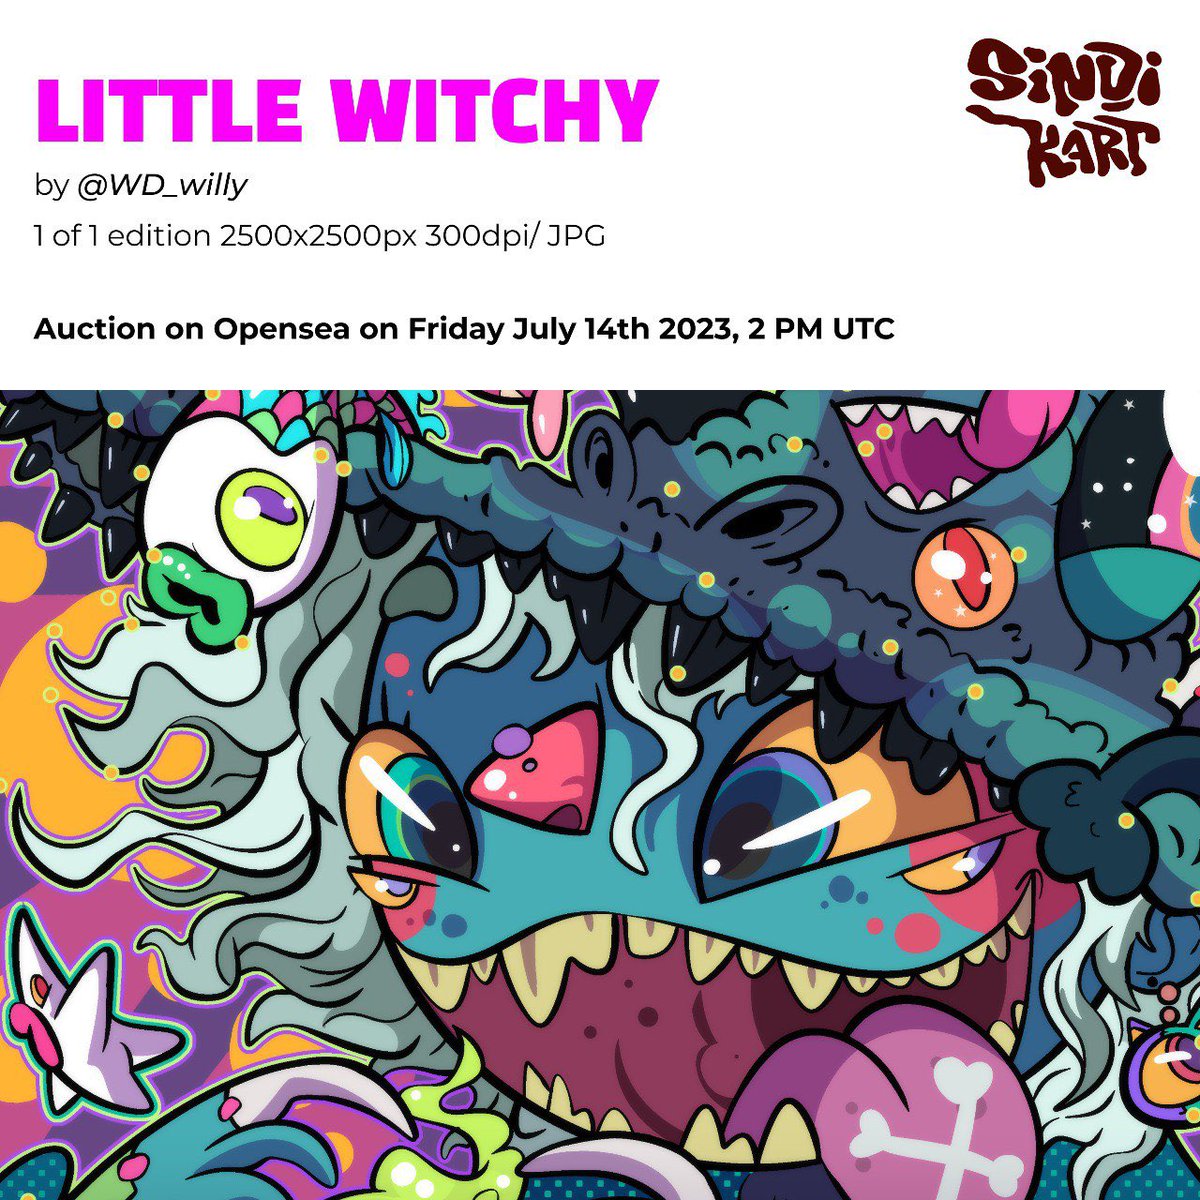 Jump into @WD_Willy colorful world again with LITTLE WITCHY 'The little witch who was just learning made a small magic embers'